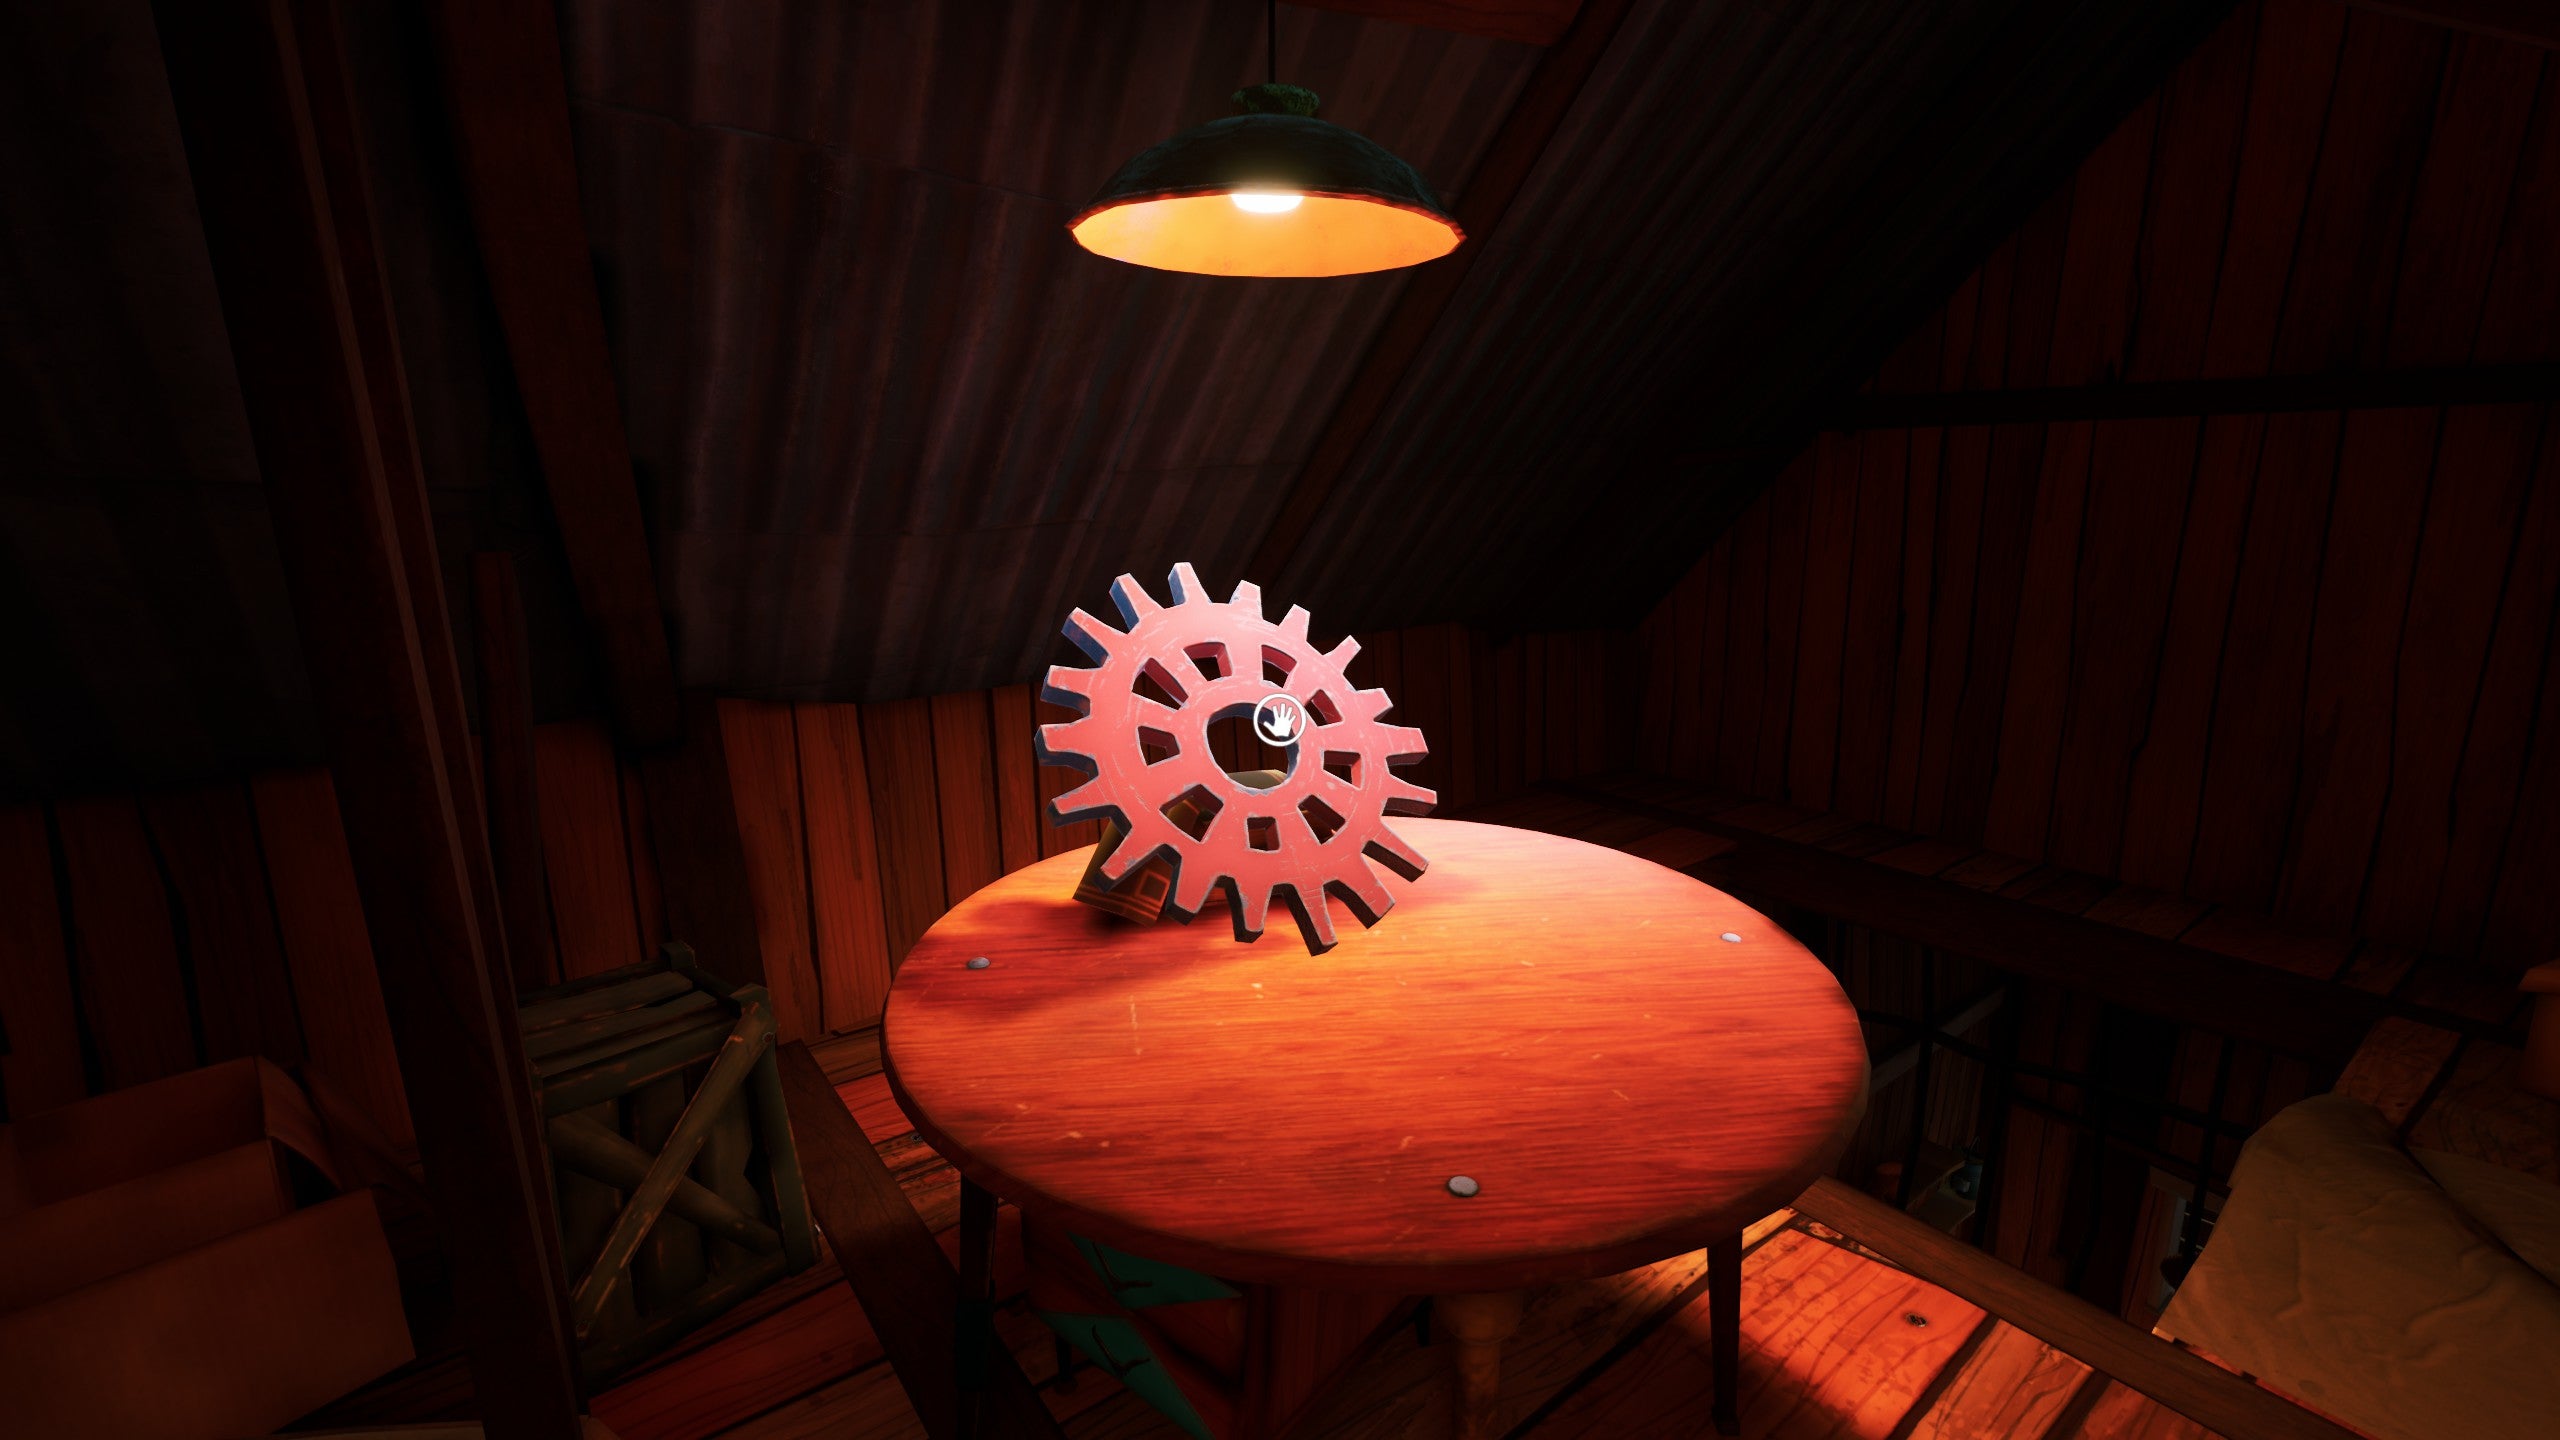 A red cog on a table in the barn in Hello Neighbor 2